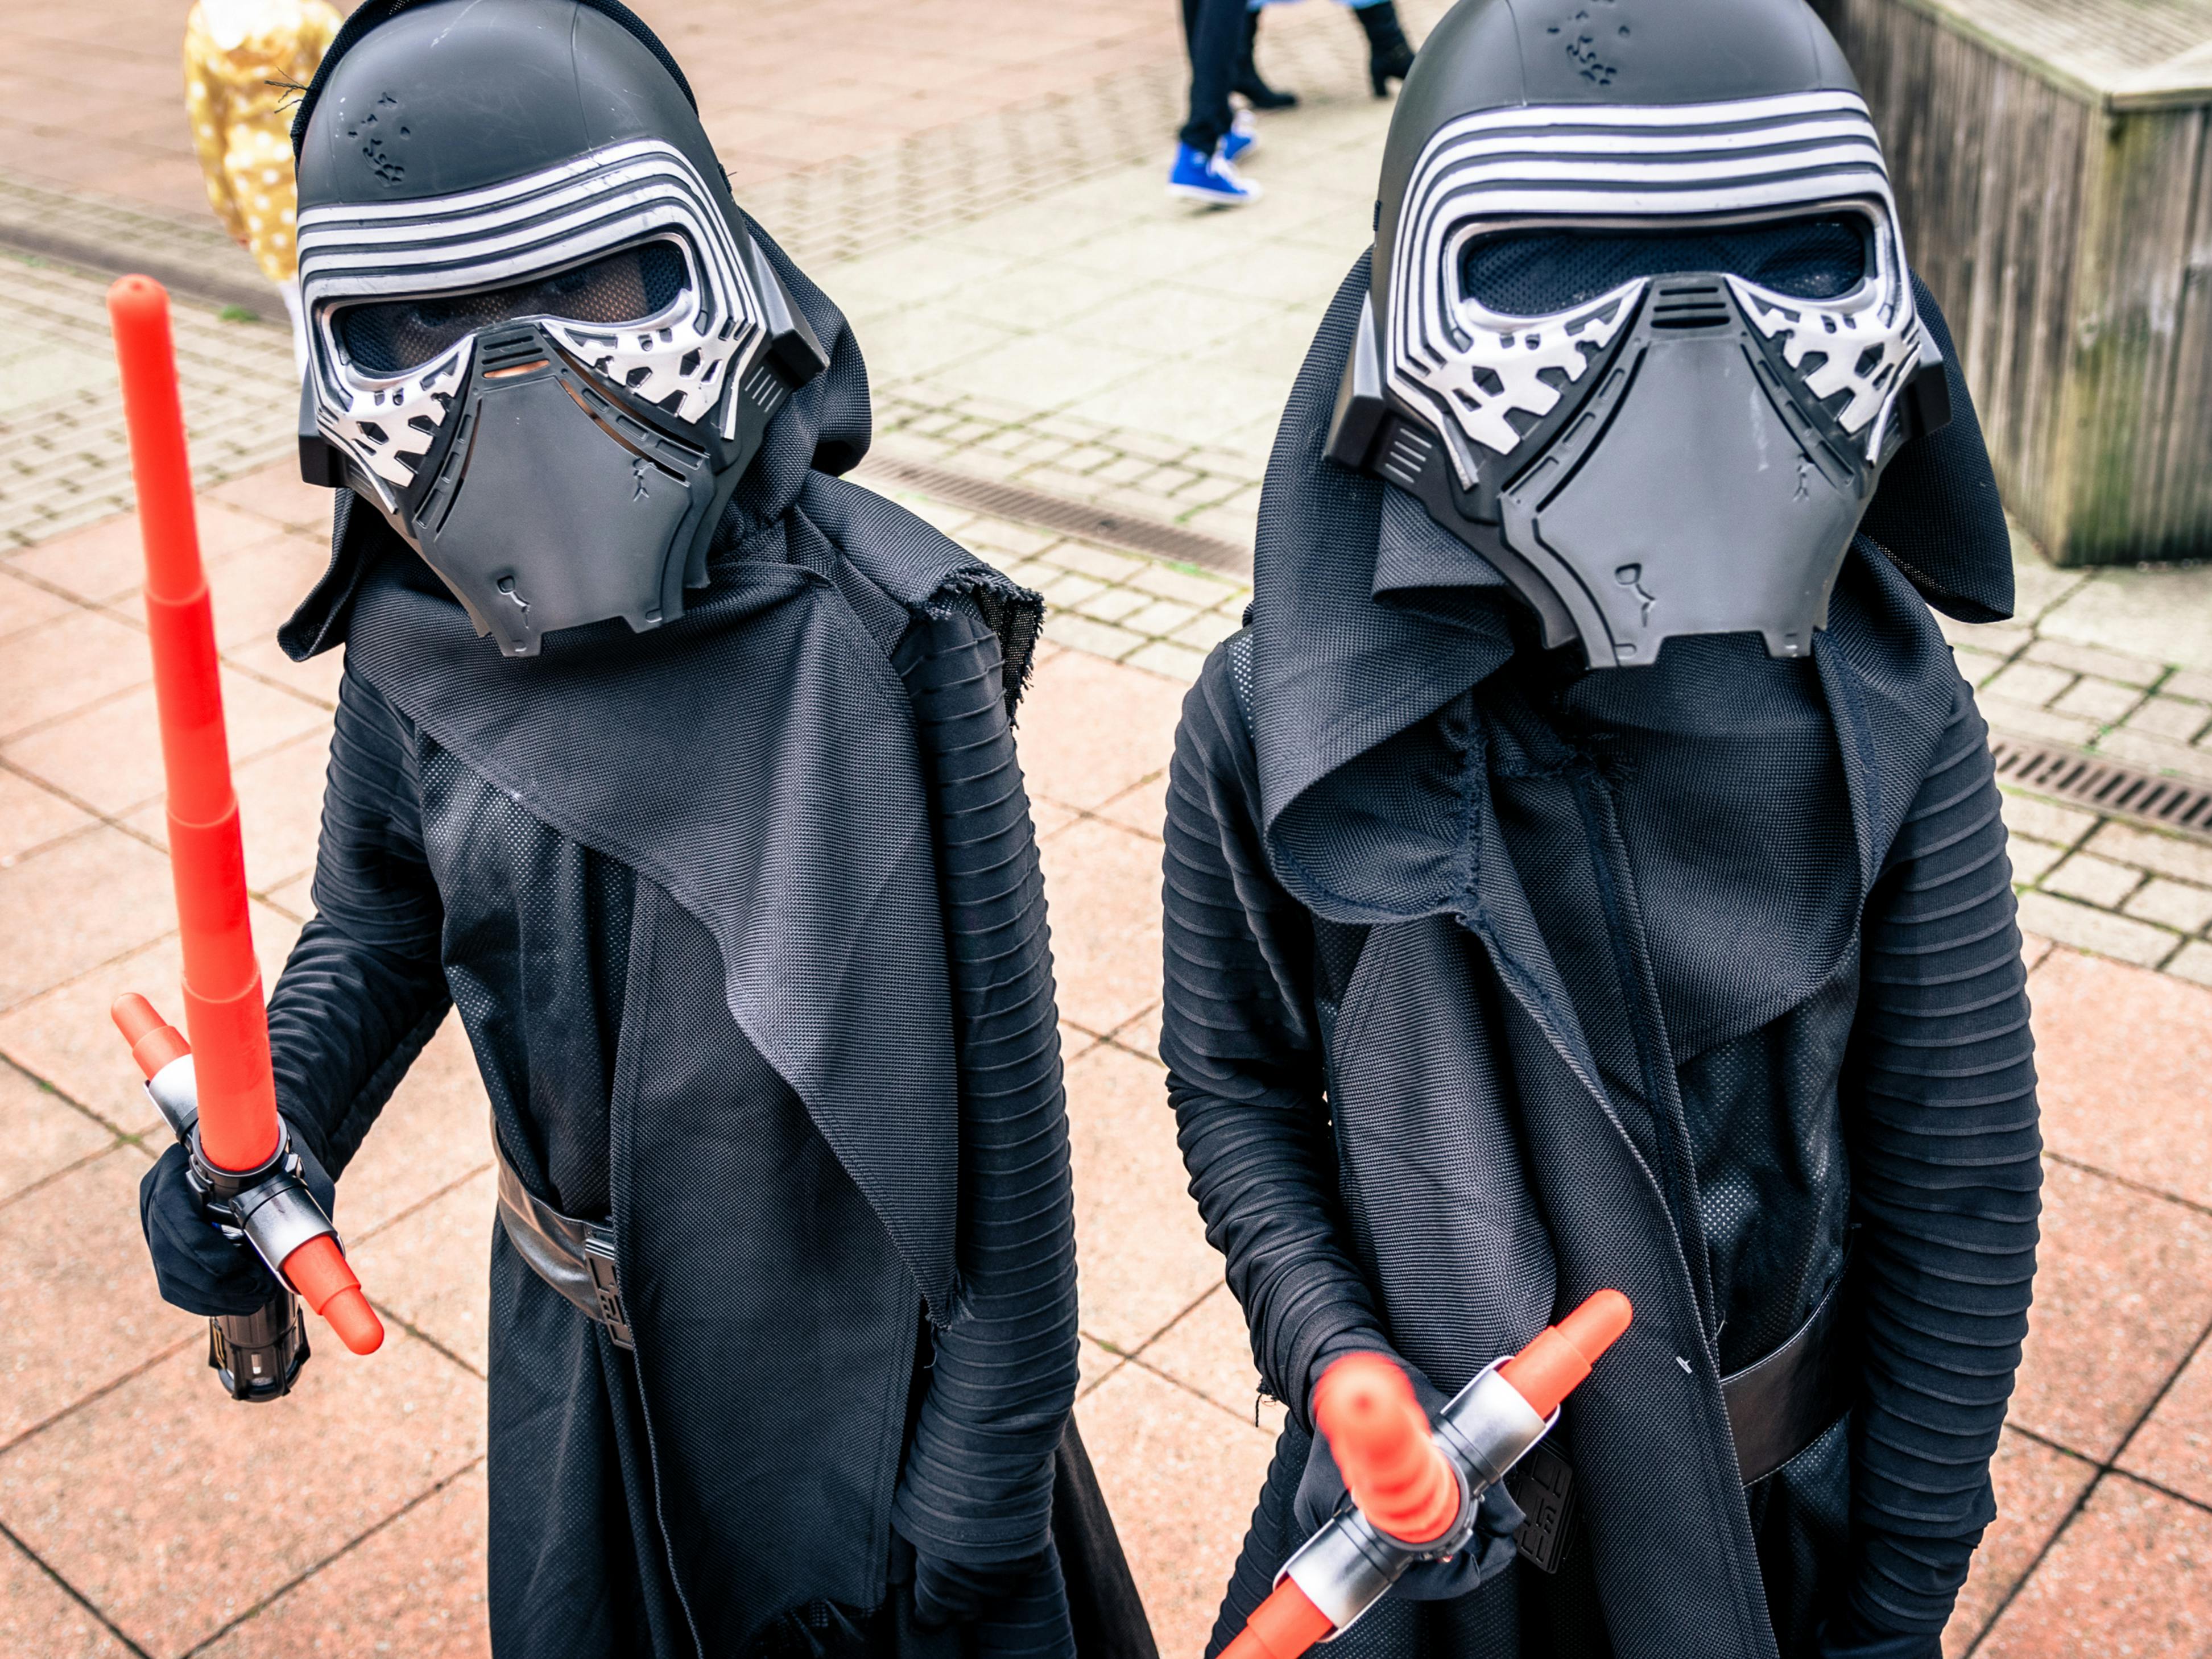 Two kids dressed up as Kylo Ren for Halloween